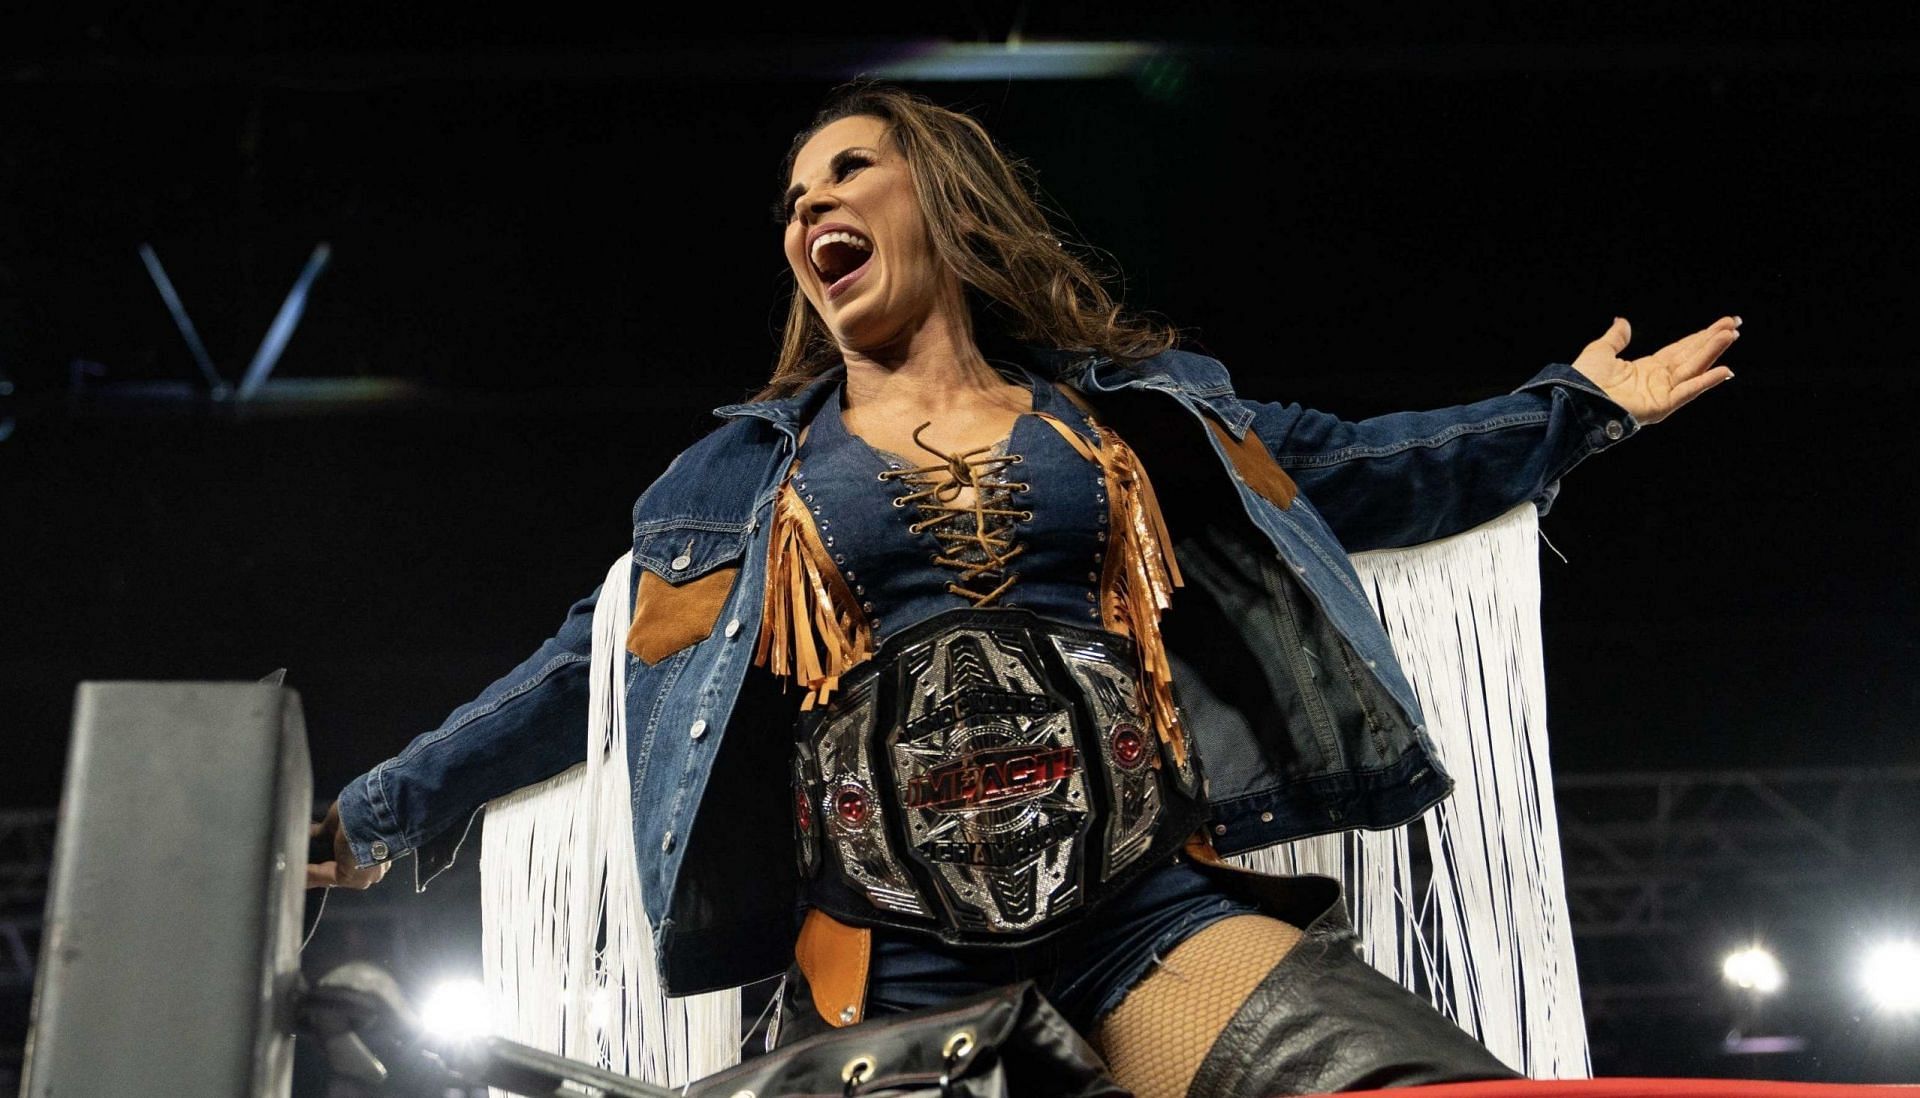 Mickie James is the current IMPACT Knockouts World Champion